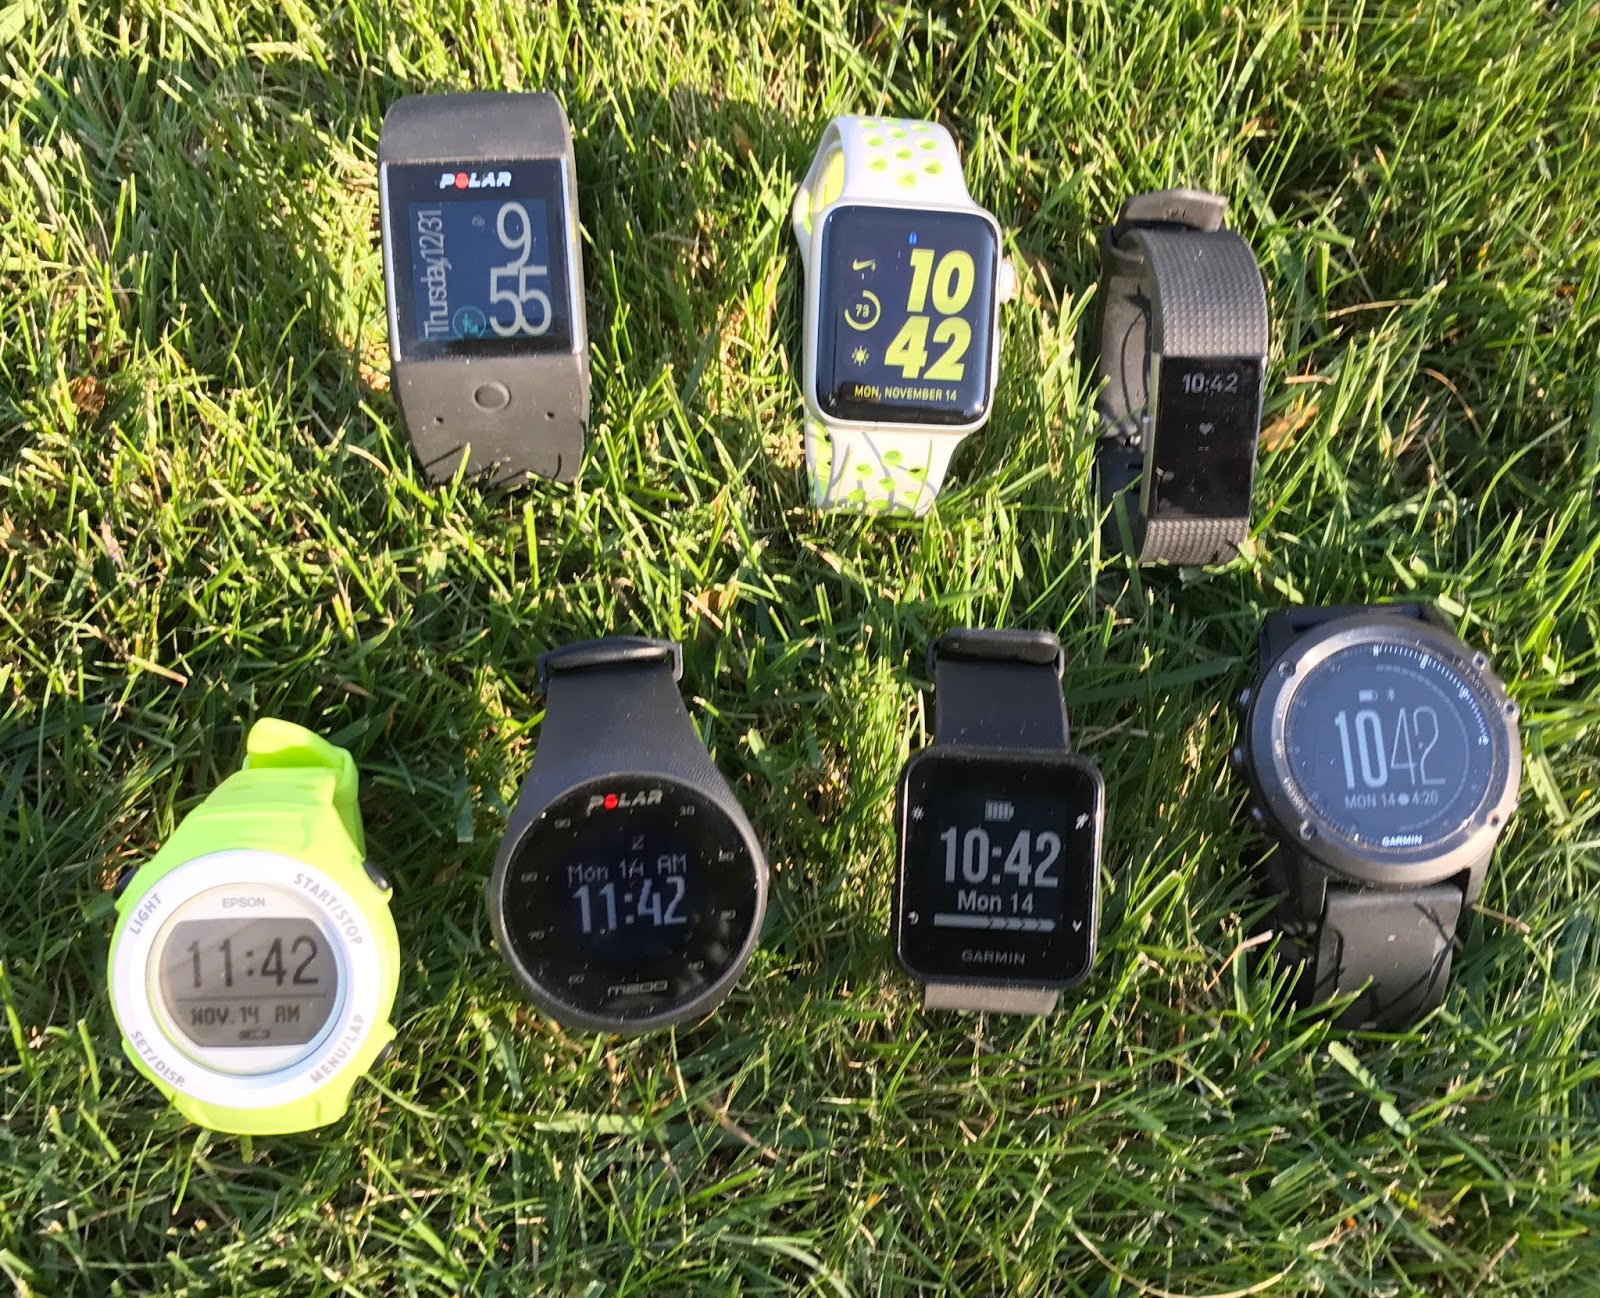 Road Trail Run: 2016 Run Tech Holiday Gift Guide & Reviews-GPS, Polar, Fitbit, Lumo, Whoop, Bose, Epson, AppleWatch Nike+